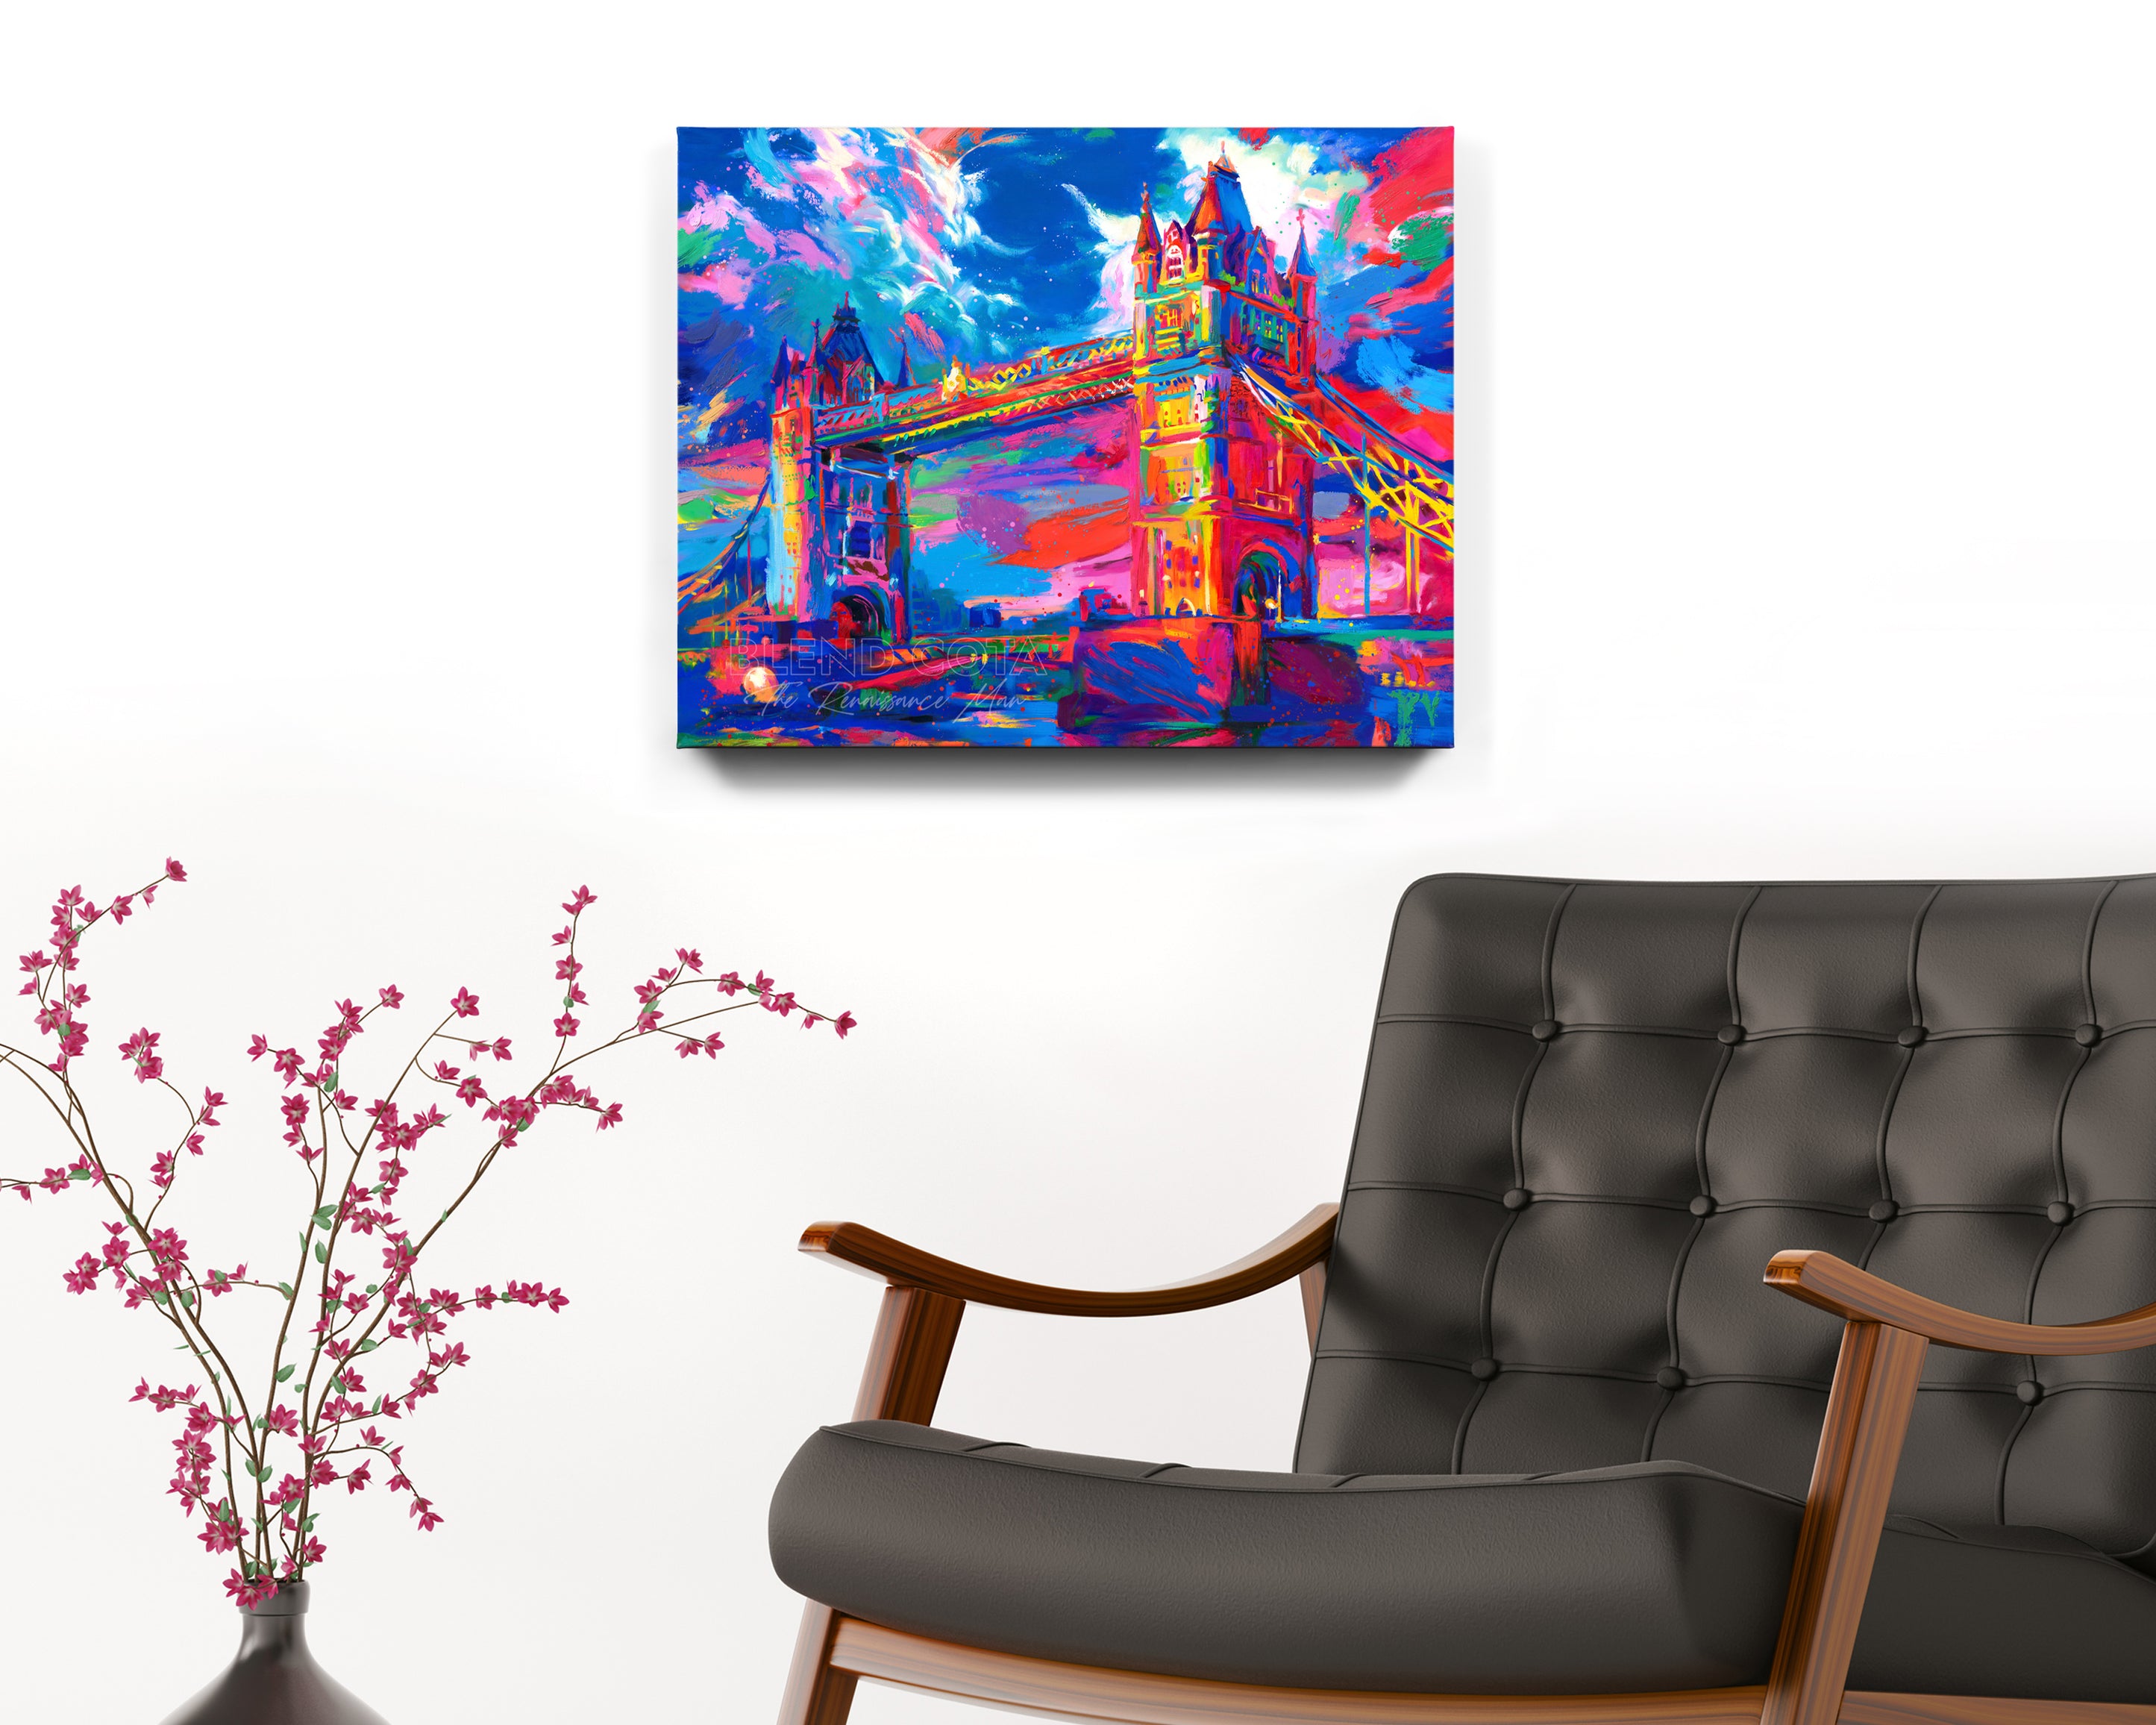 Art print on canvas of the London Tower Bridge in United Kingdom, seen below from the Thames, displaying masterful engineering and architecture of Victorian Gothic style, and symbol of strength and beauty, in colorful brushstrokes, color expressionism style in room setting.